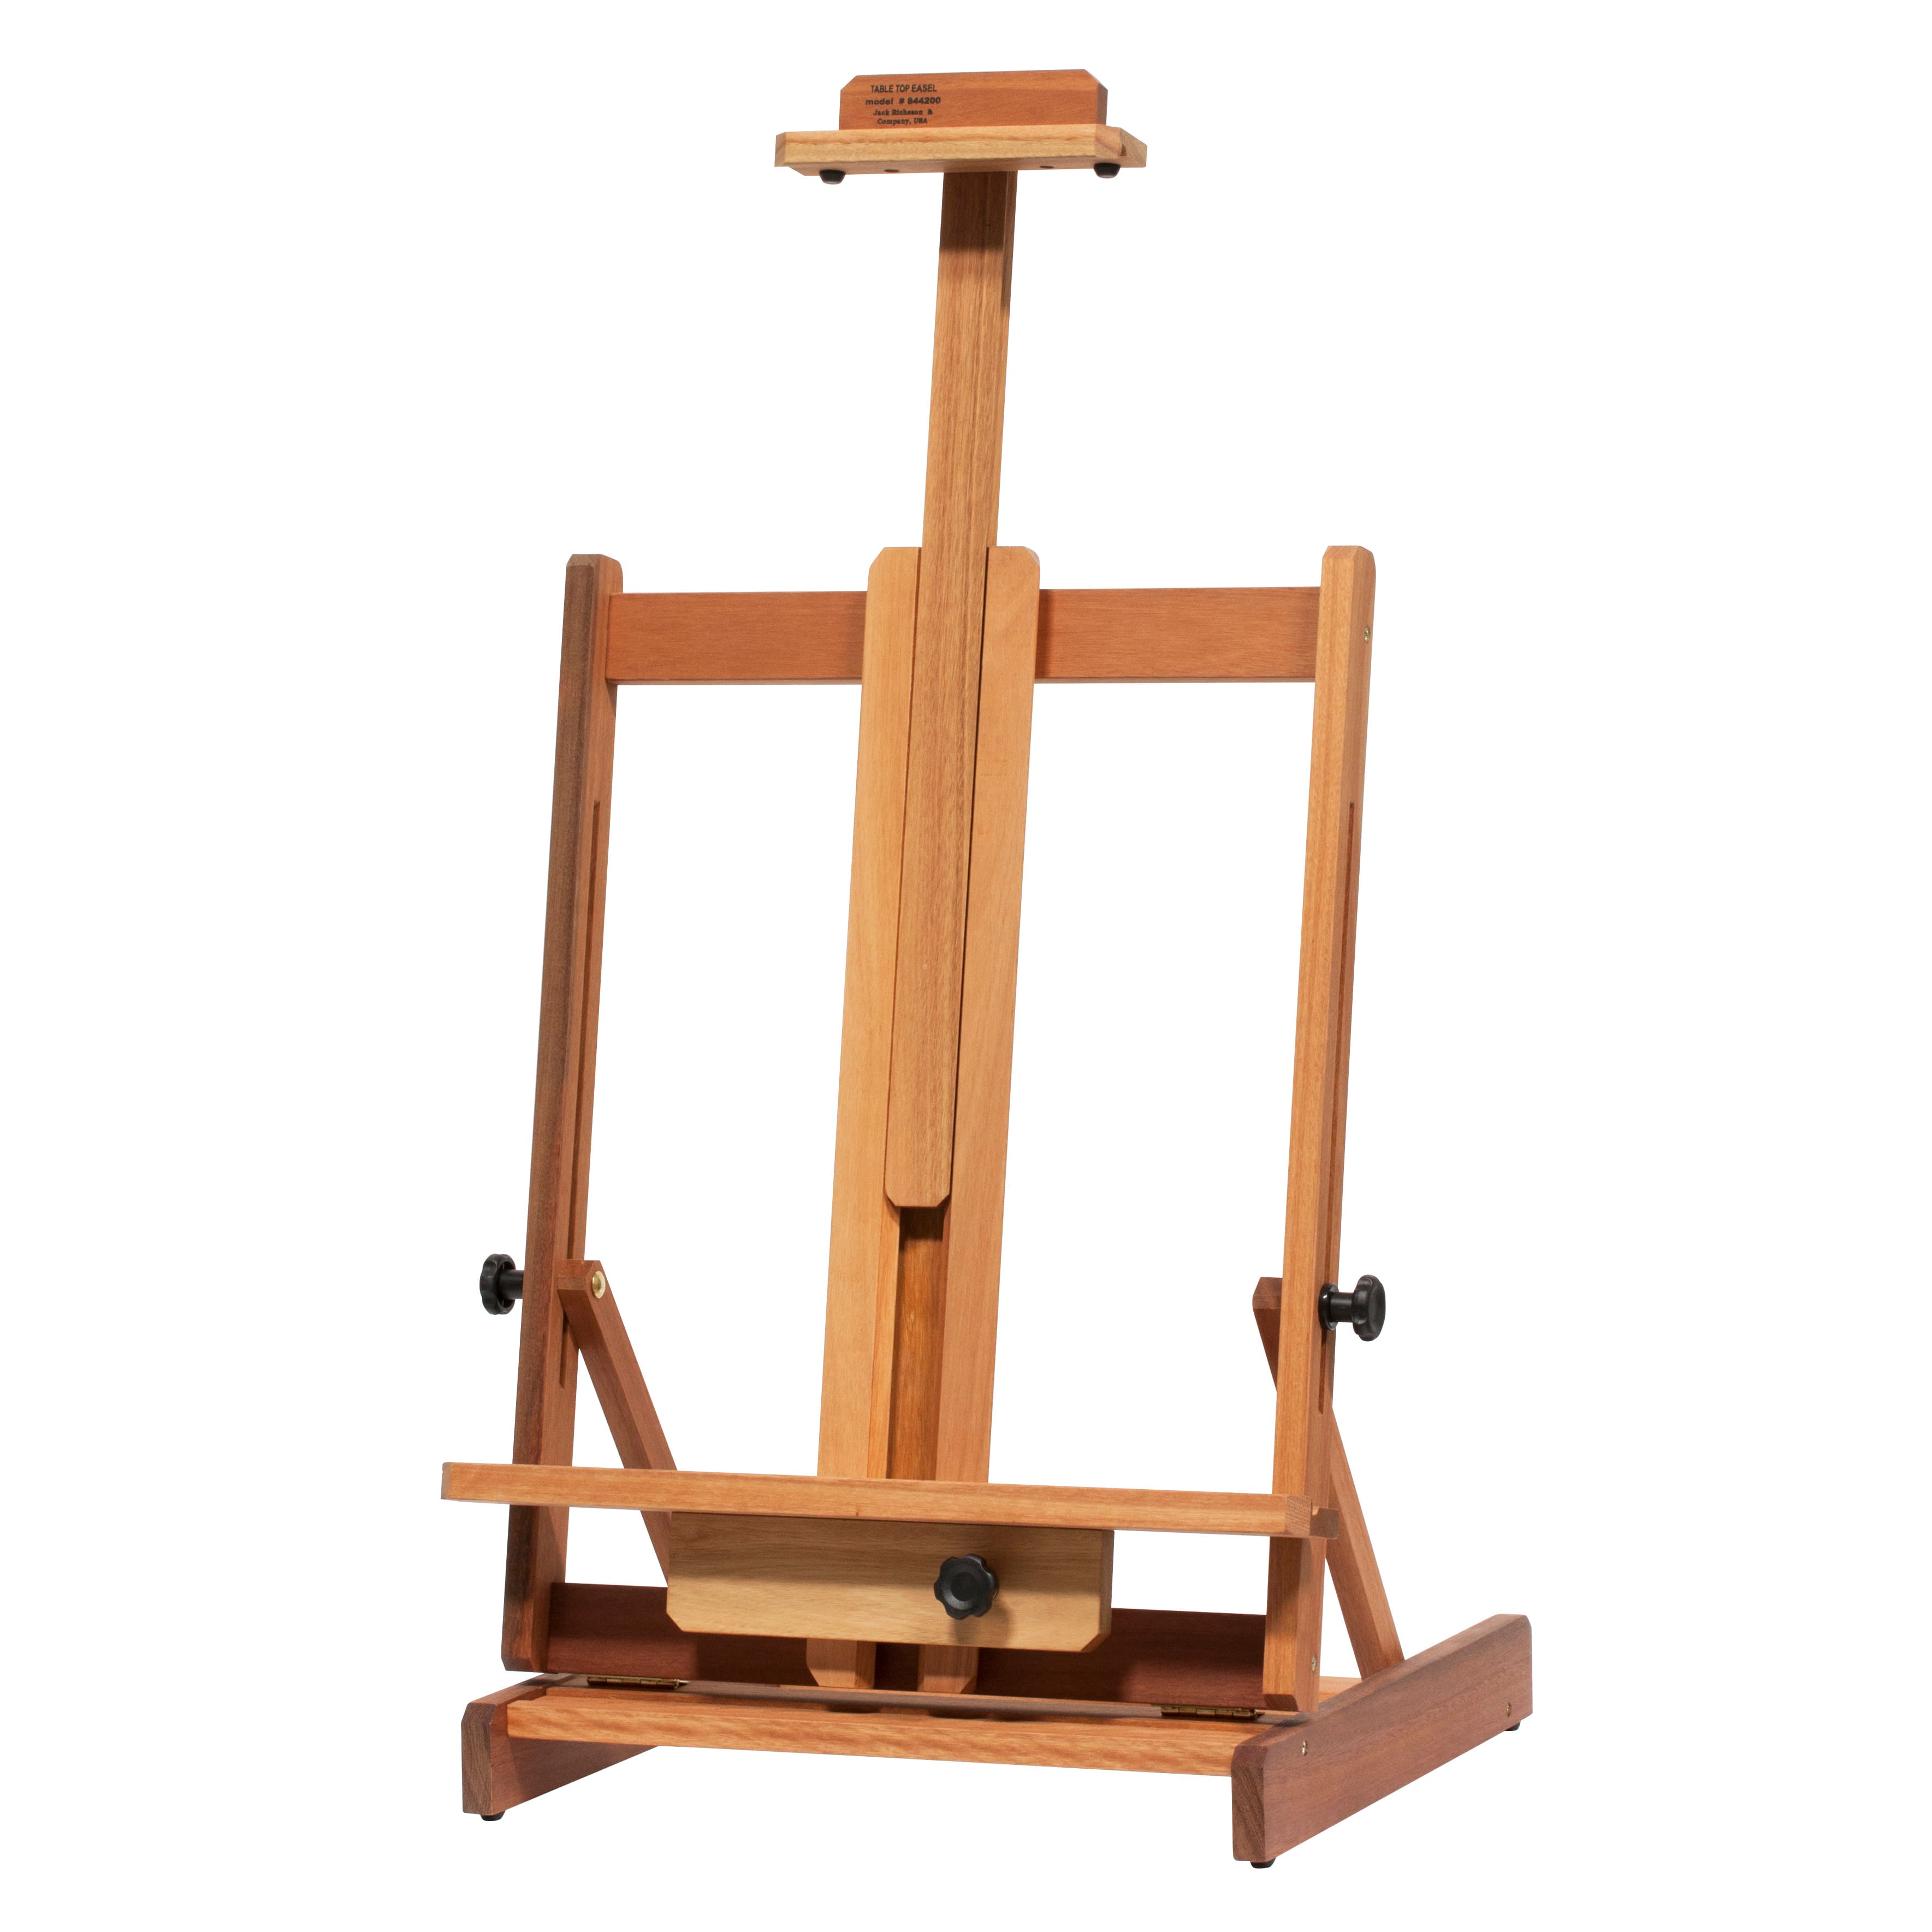 Juvale Wood Table Top Easels, Bulk Easel Stands For Painting